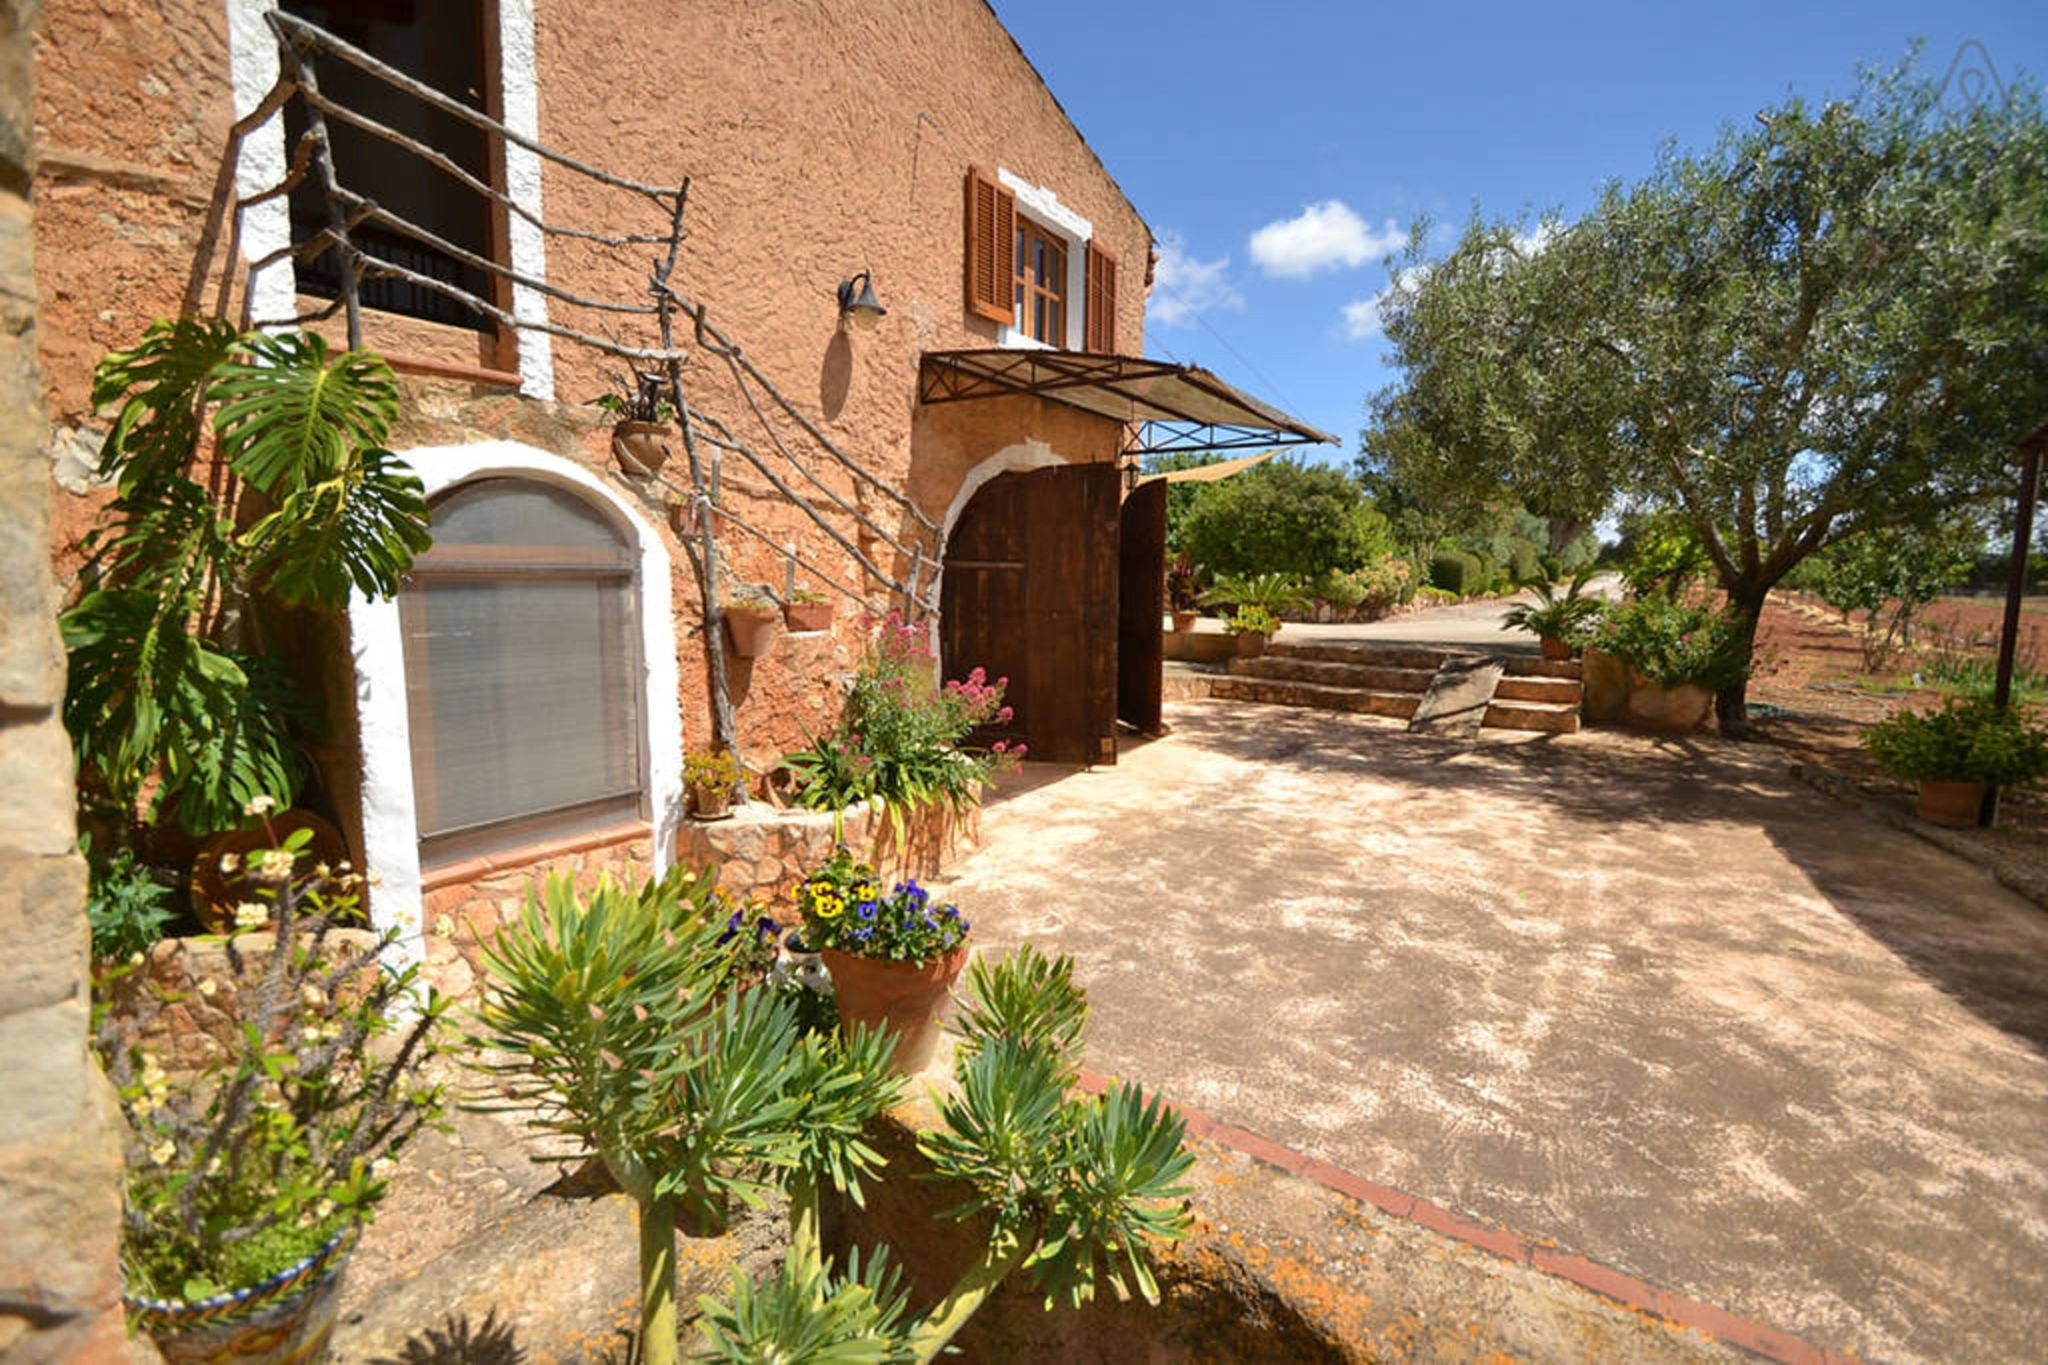 Authentic country house with sun terrace and private pool, rural location